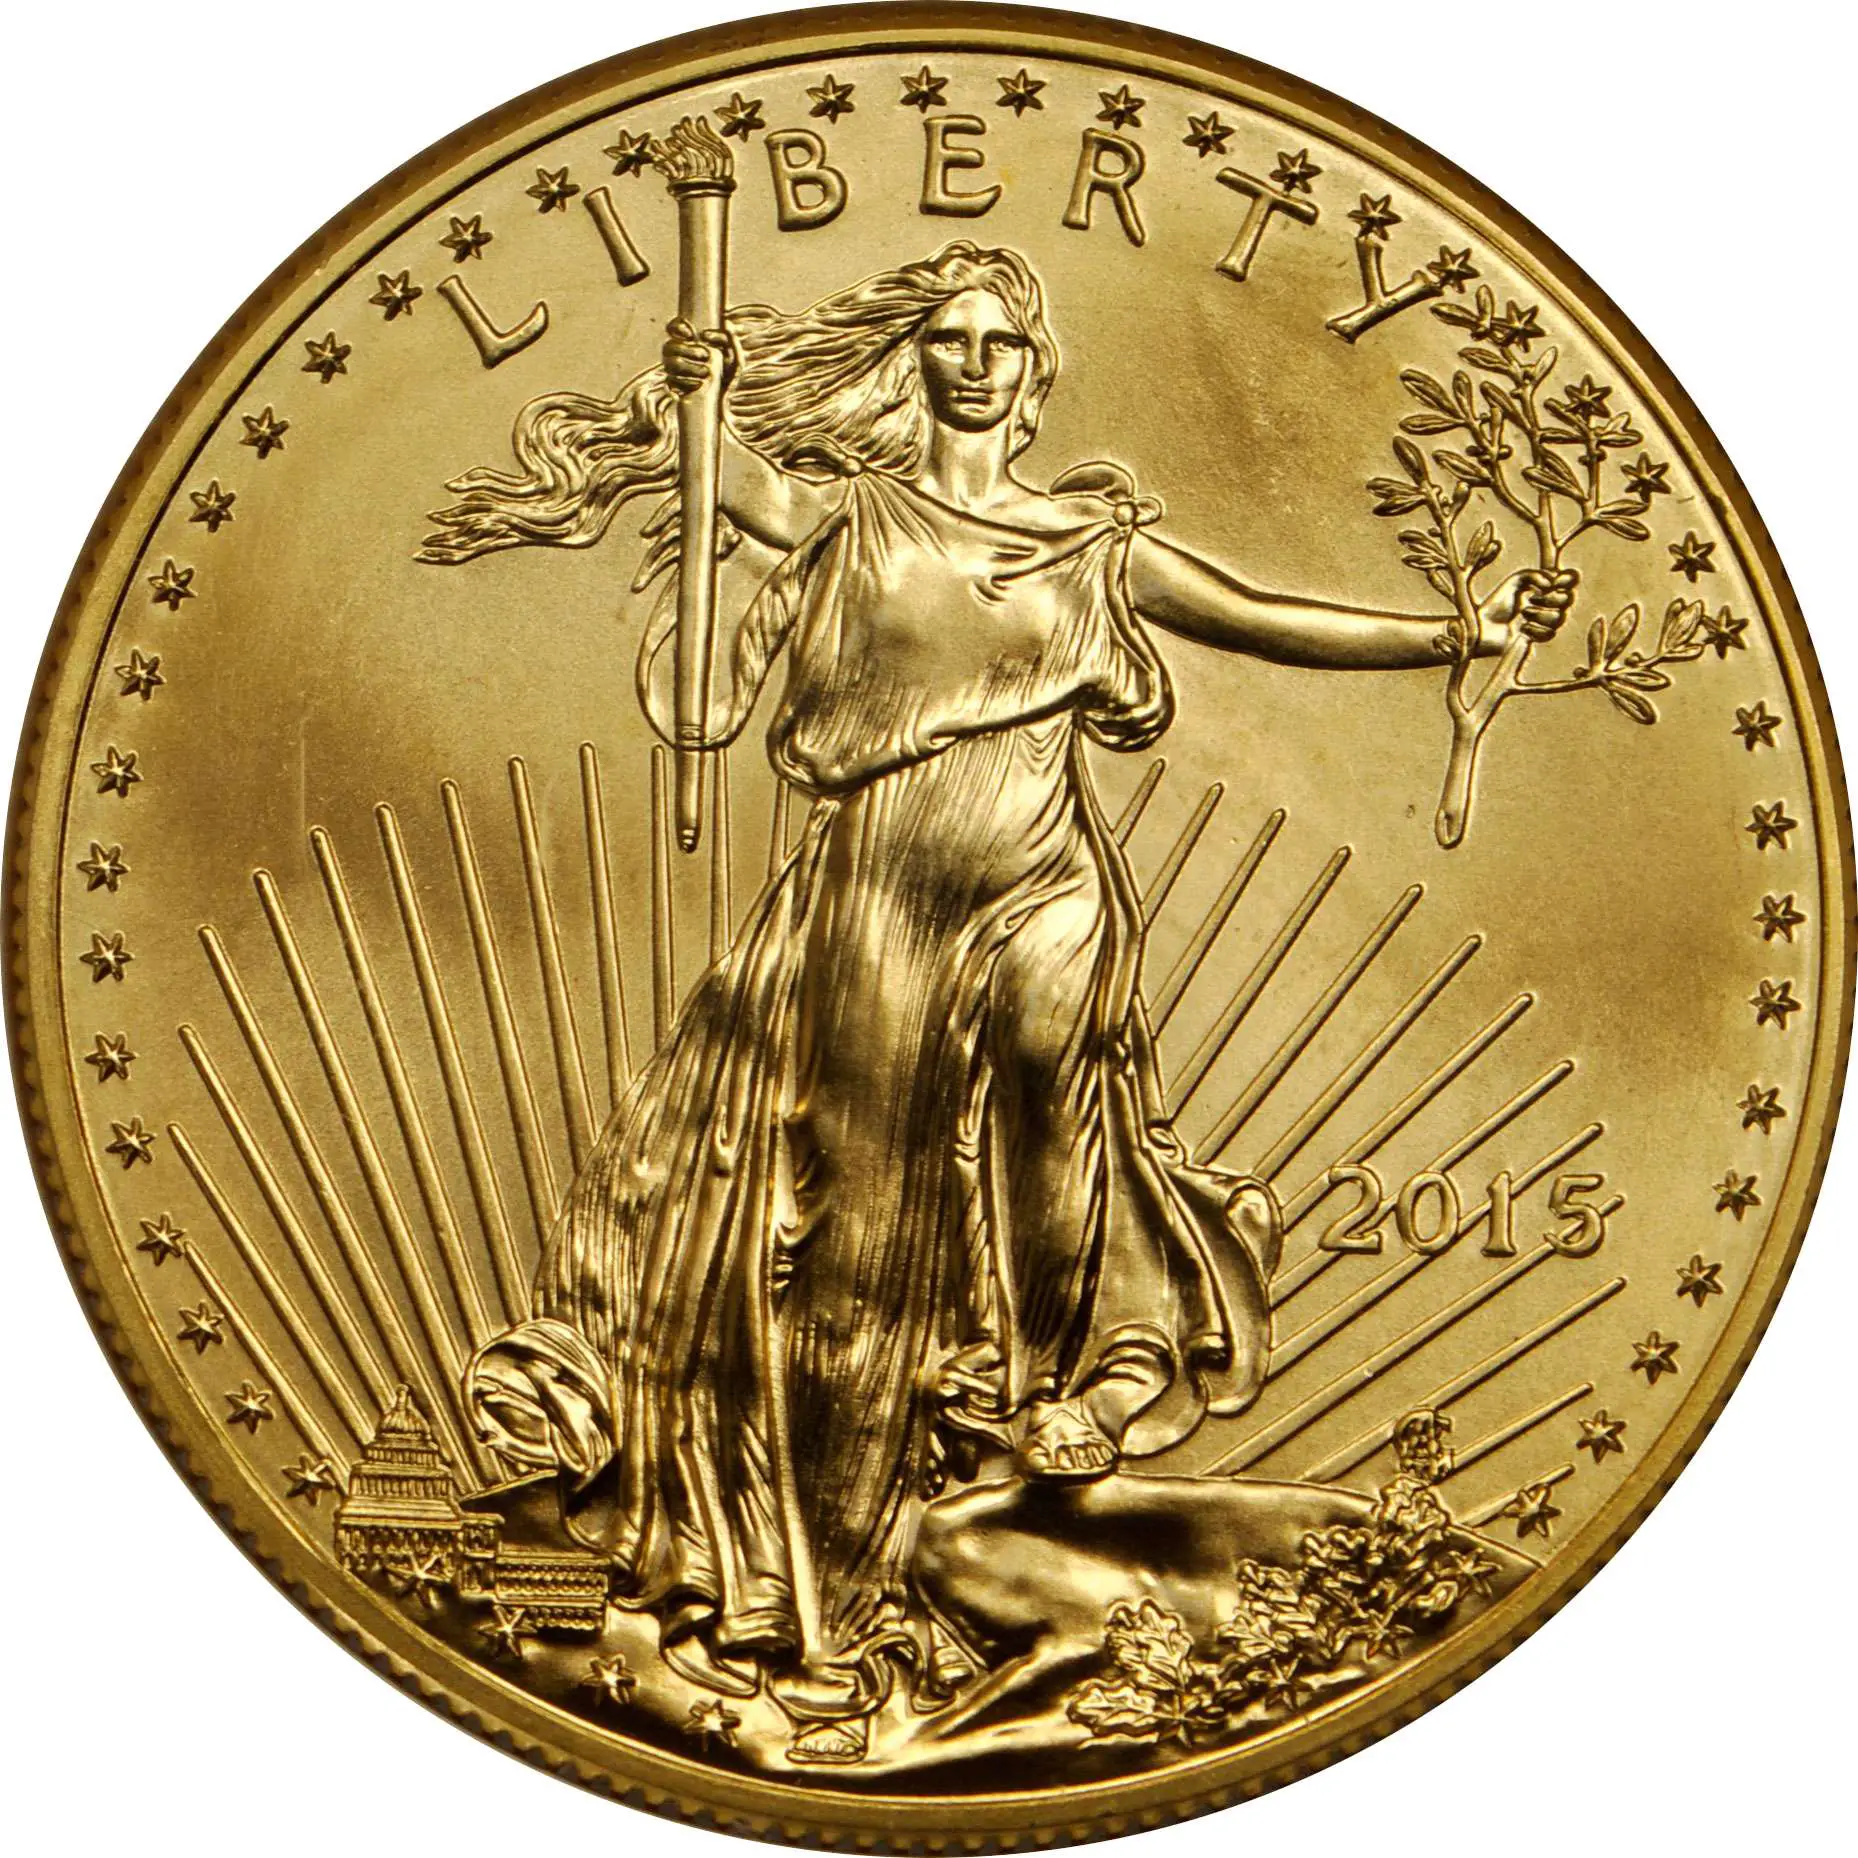 Value of 2015 $10 Gold Coin